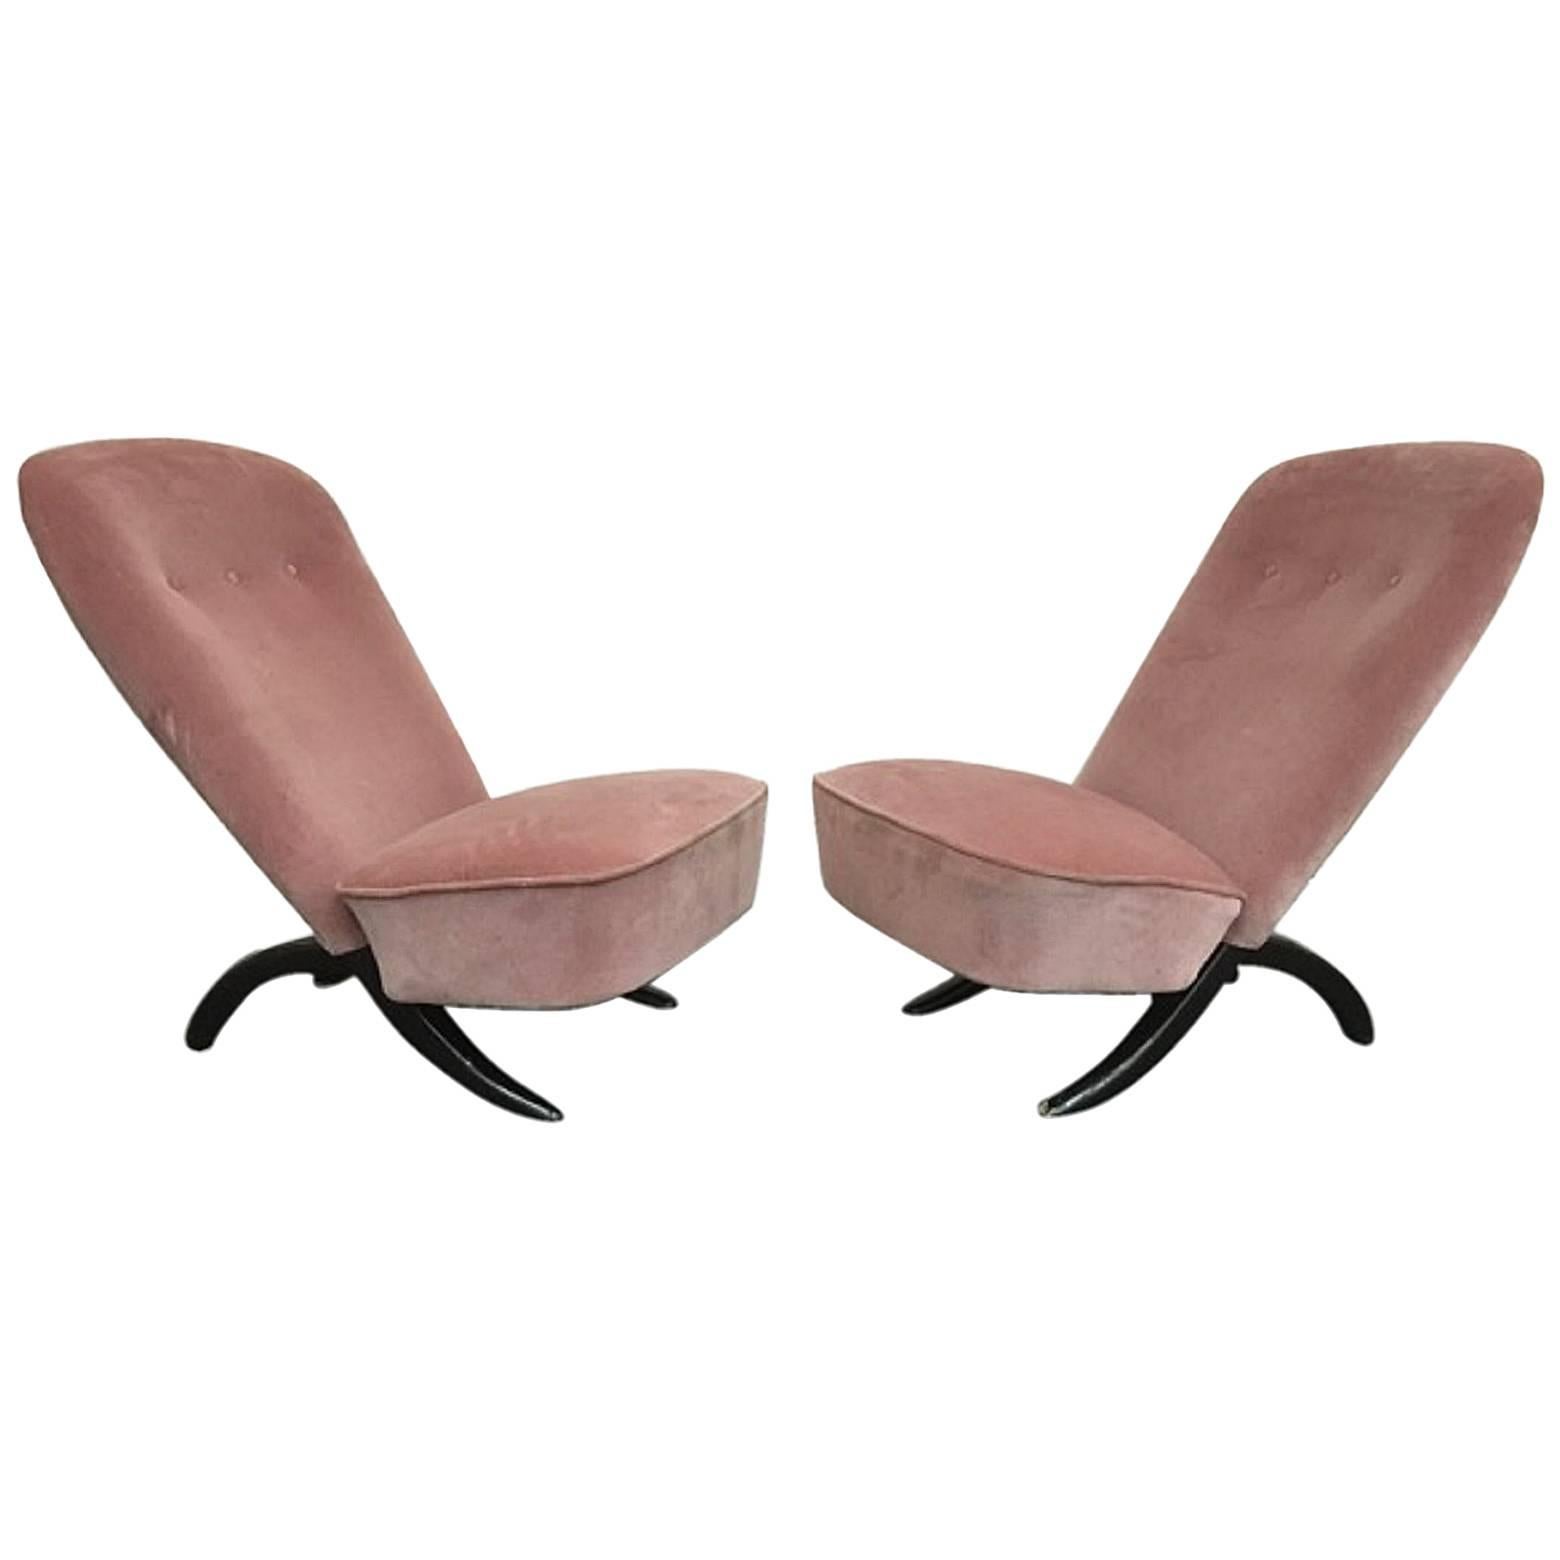 Pair of Theo Ruth for Artifort "Congo" Chairs, circa 1950 For Sale